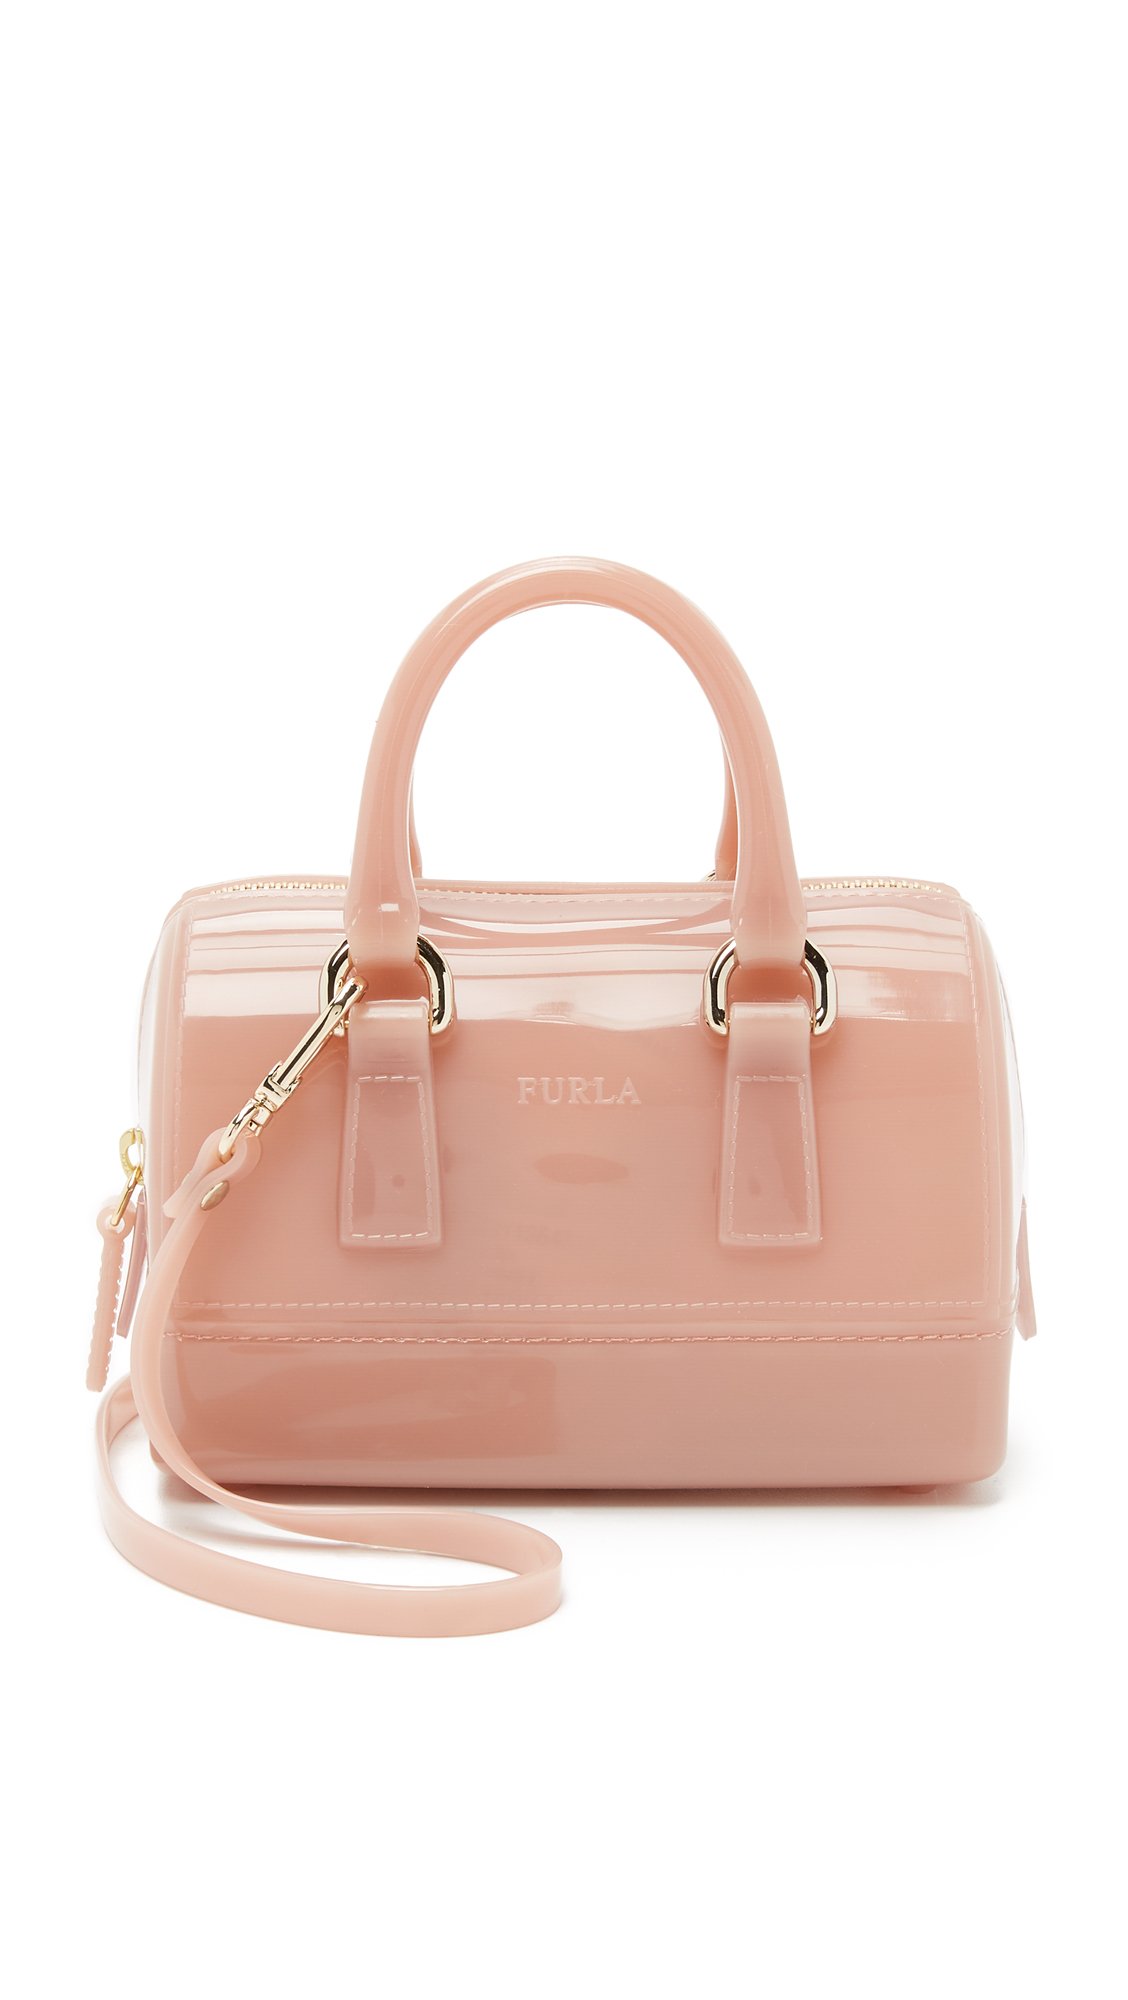 Furla Candy Sweetie Mini Bag - Moonstone in Natural | Lyst